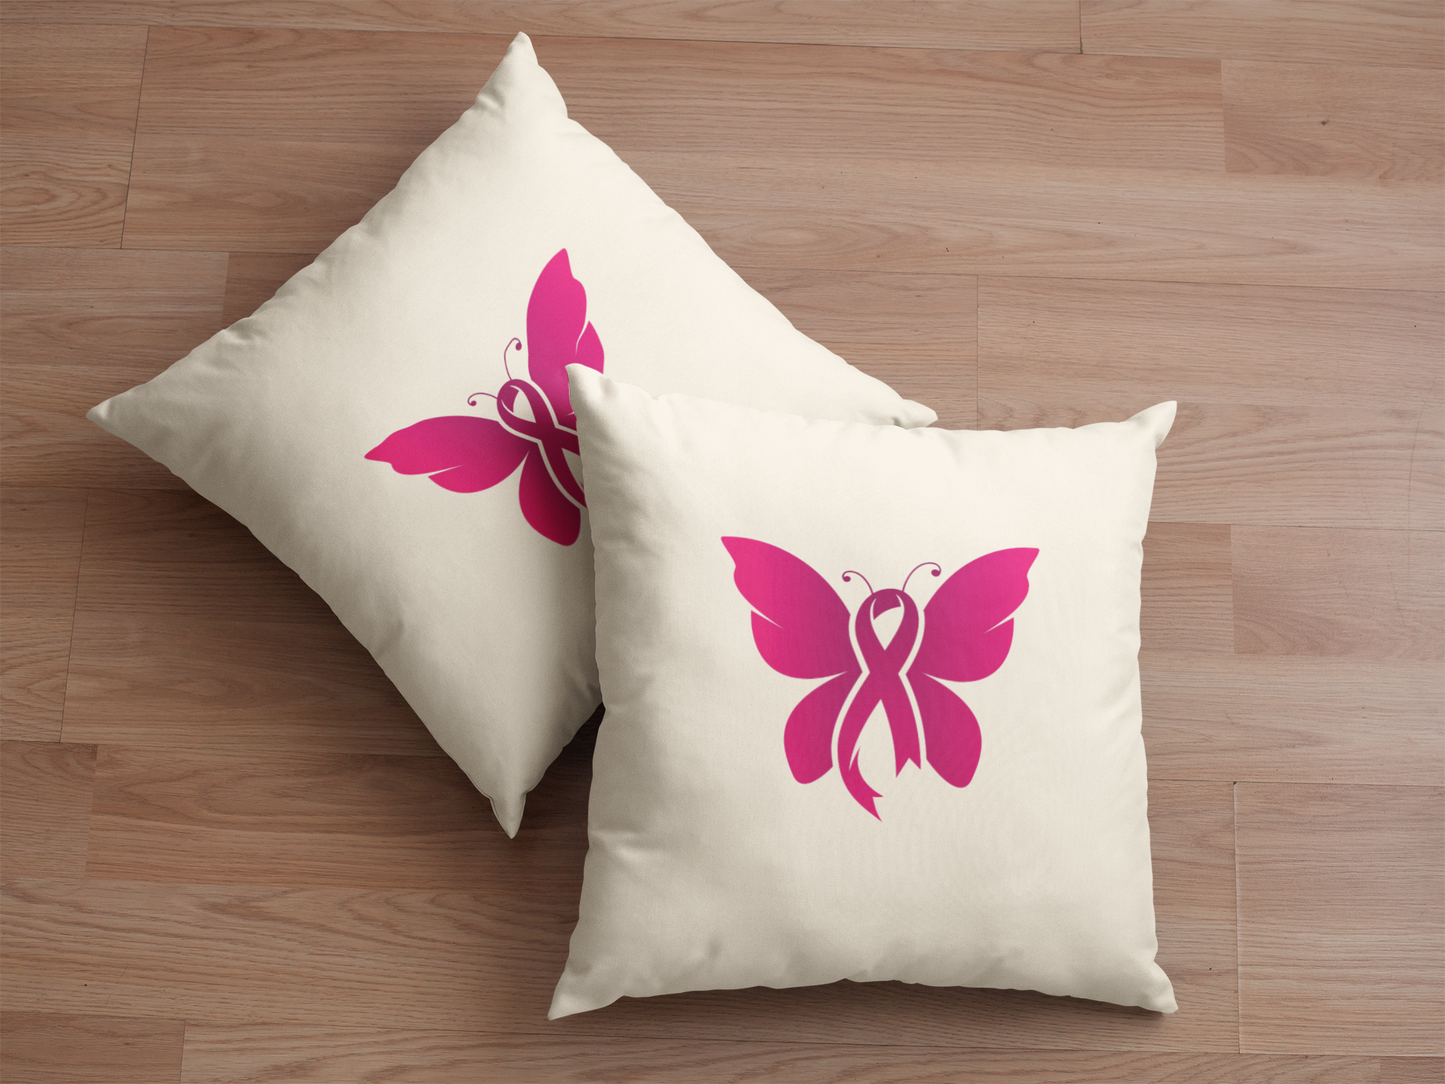 Cushion Cover - Pink Ribbon Butterfly